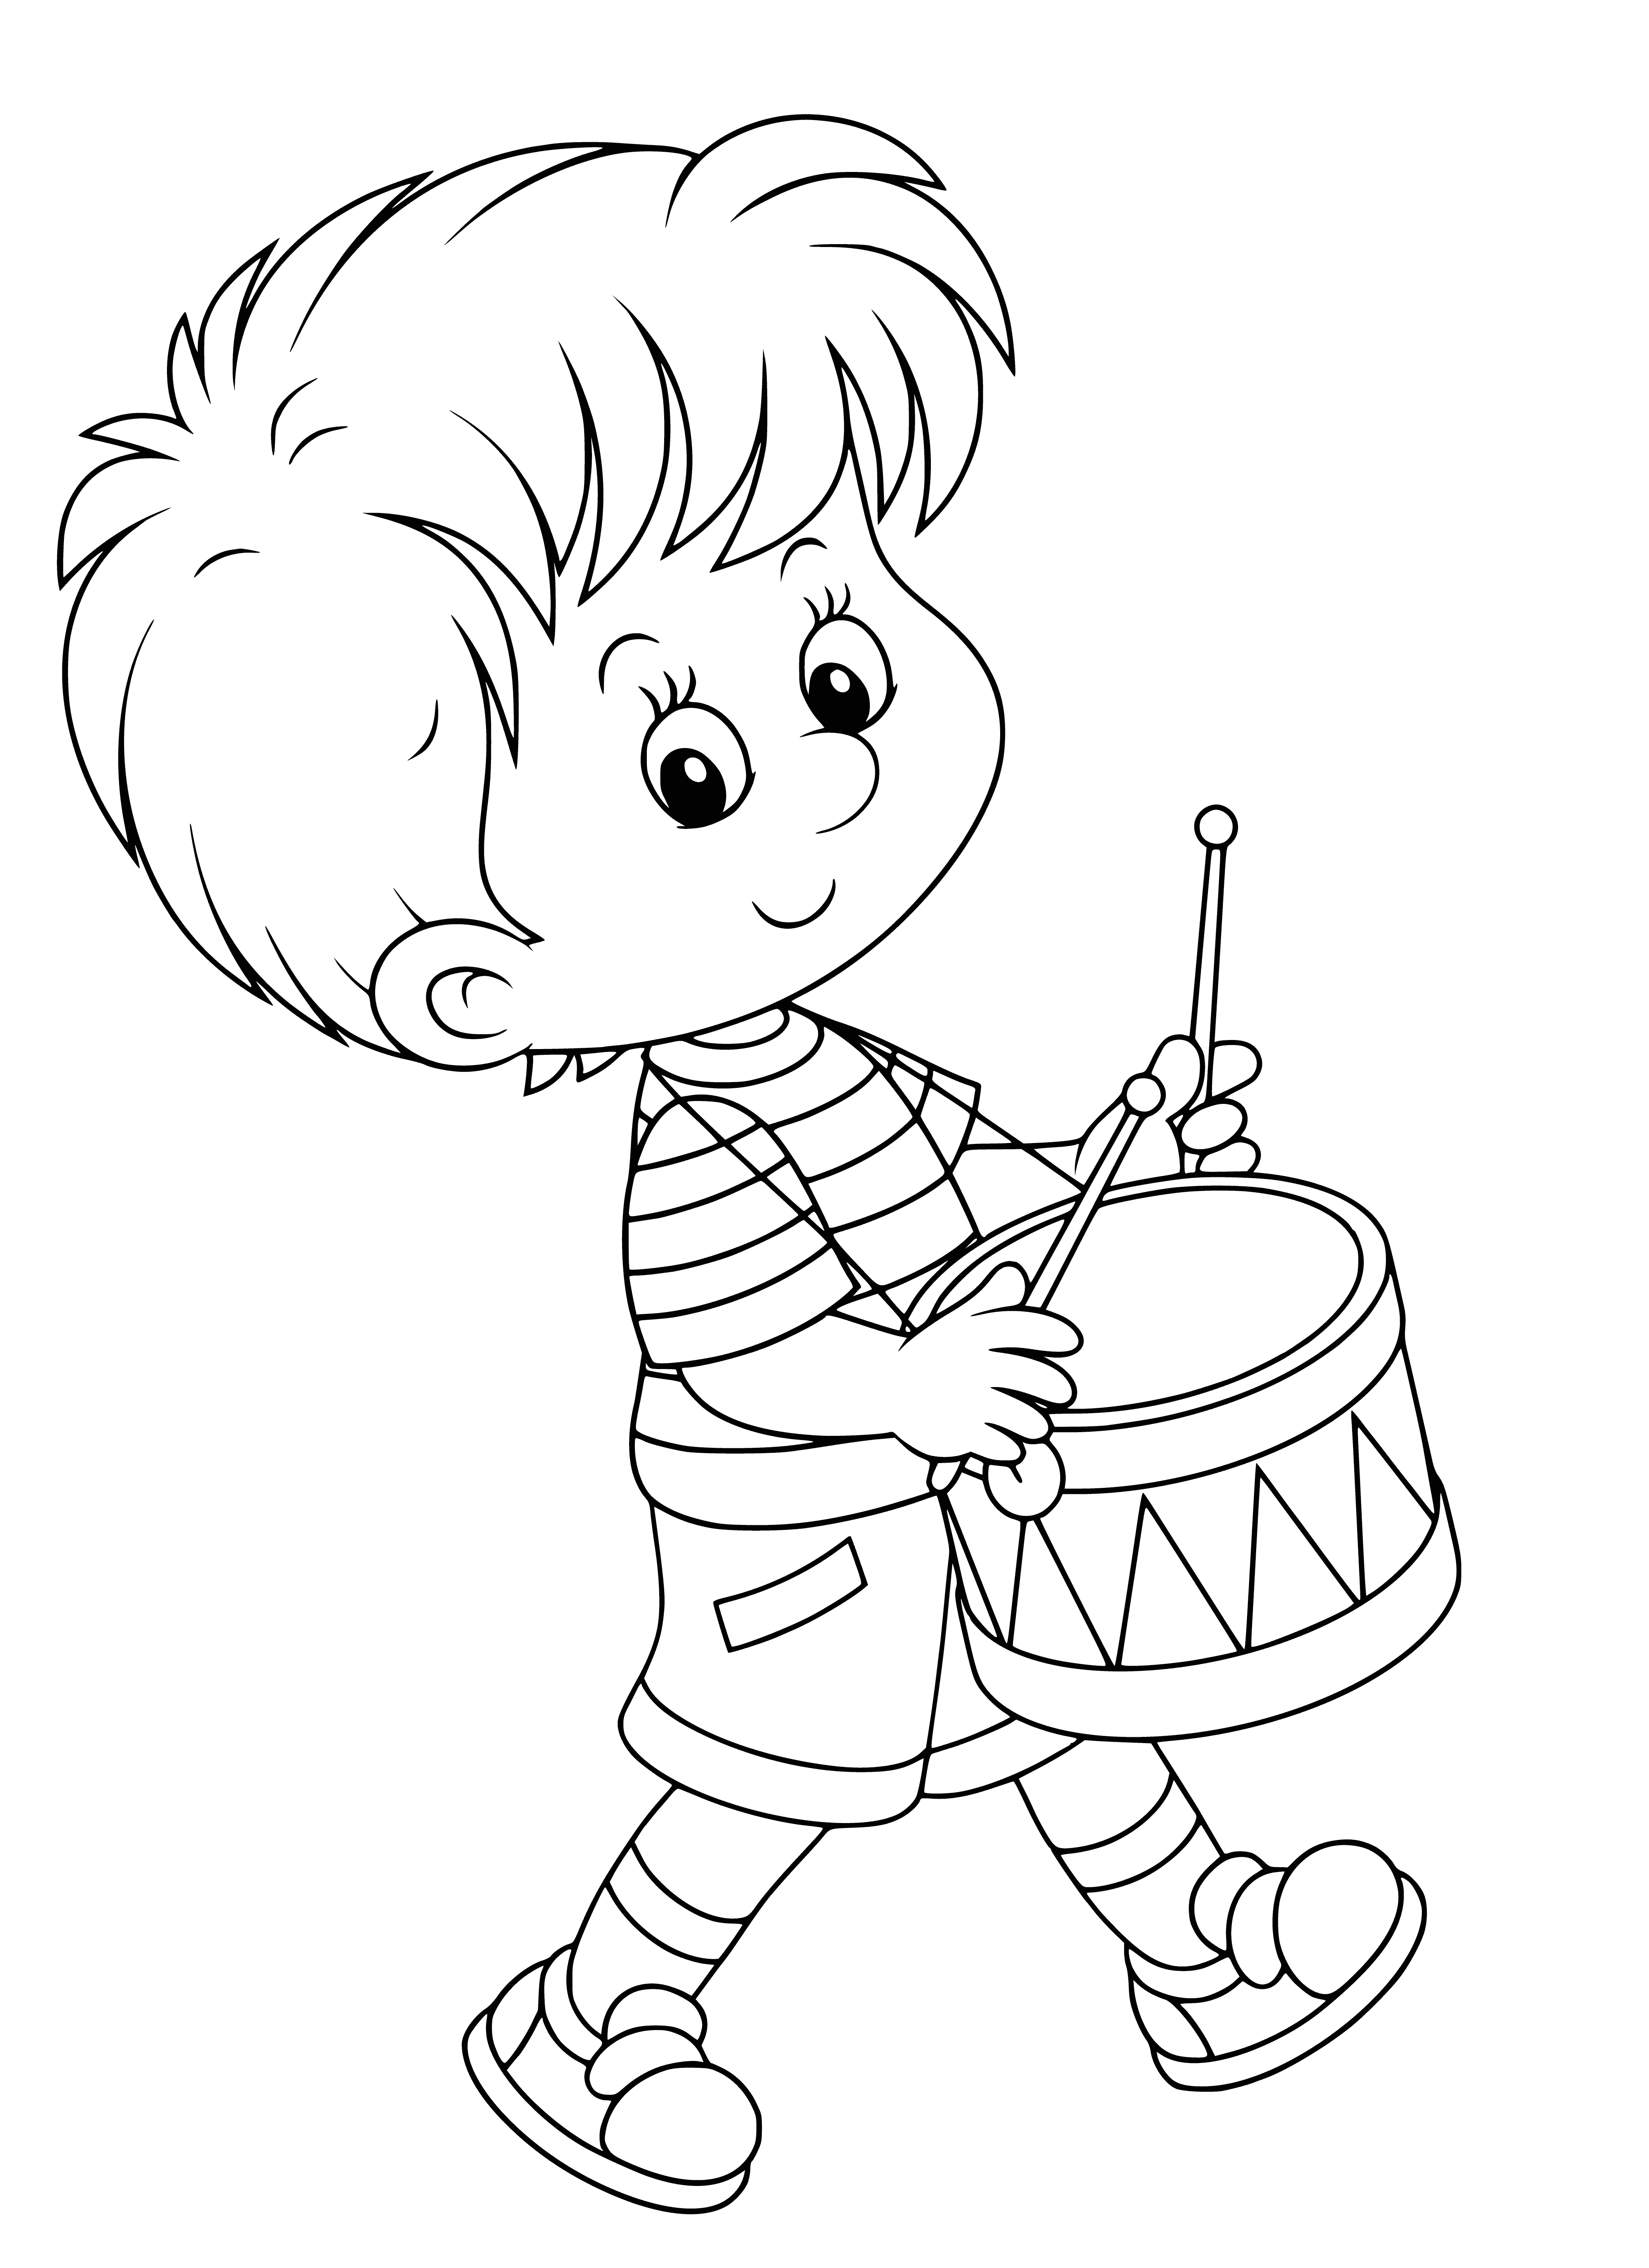 coloring page: Boy playing piano in music lesson w/teacher correcting posture. Other students watching and listening. #music #education